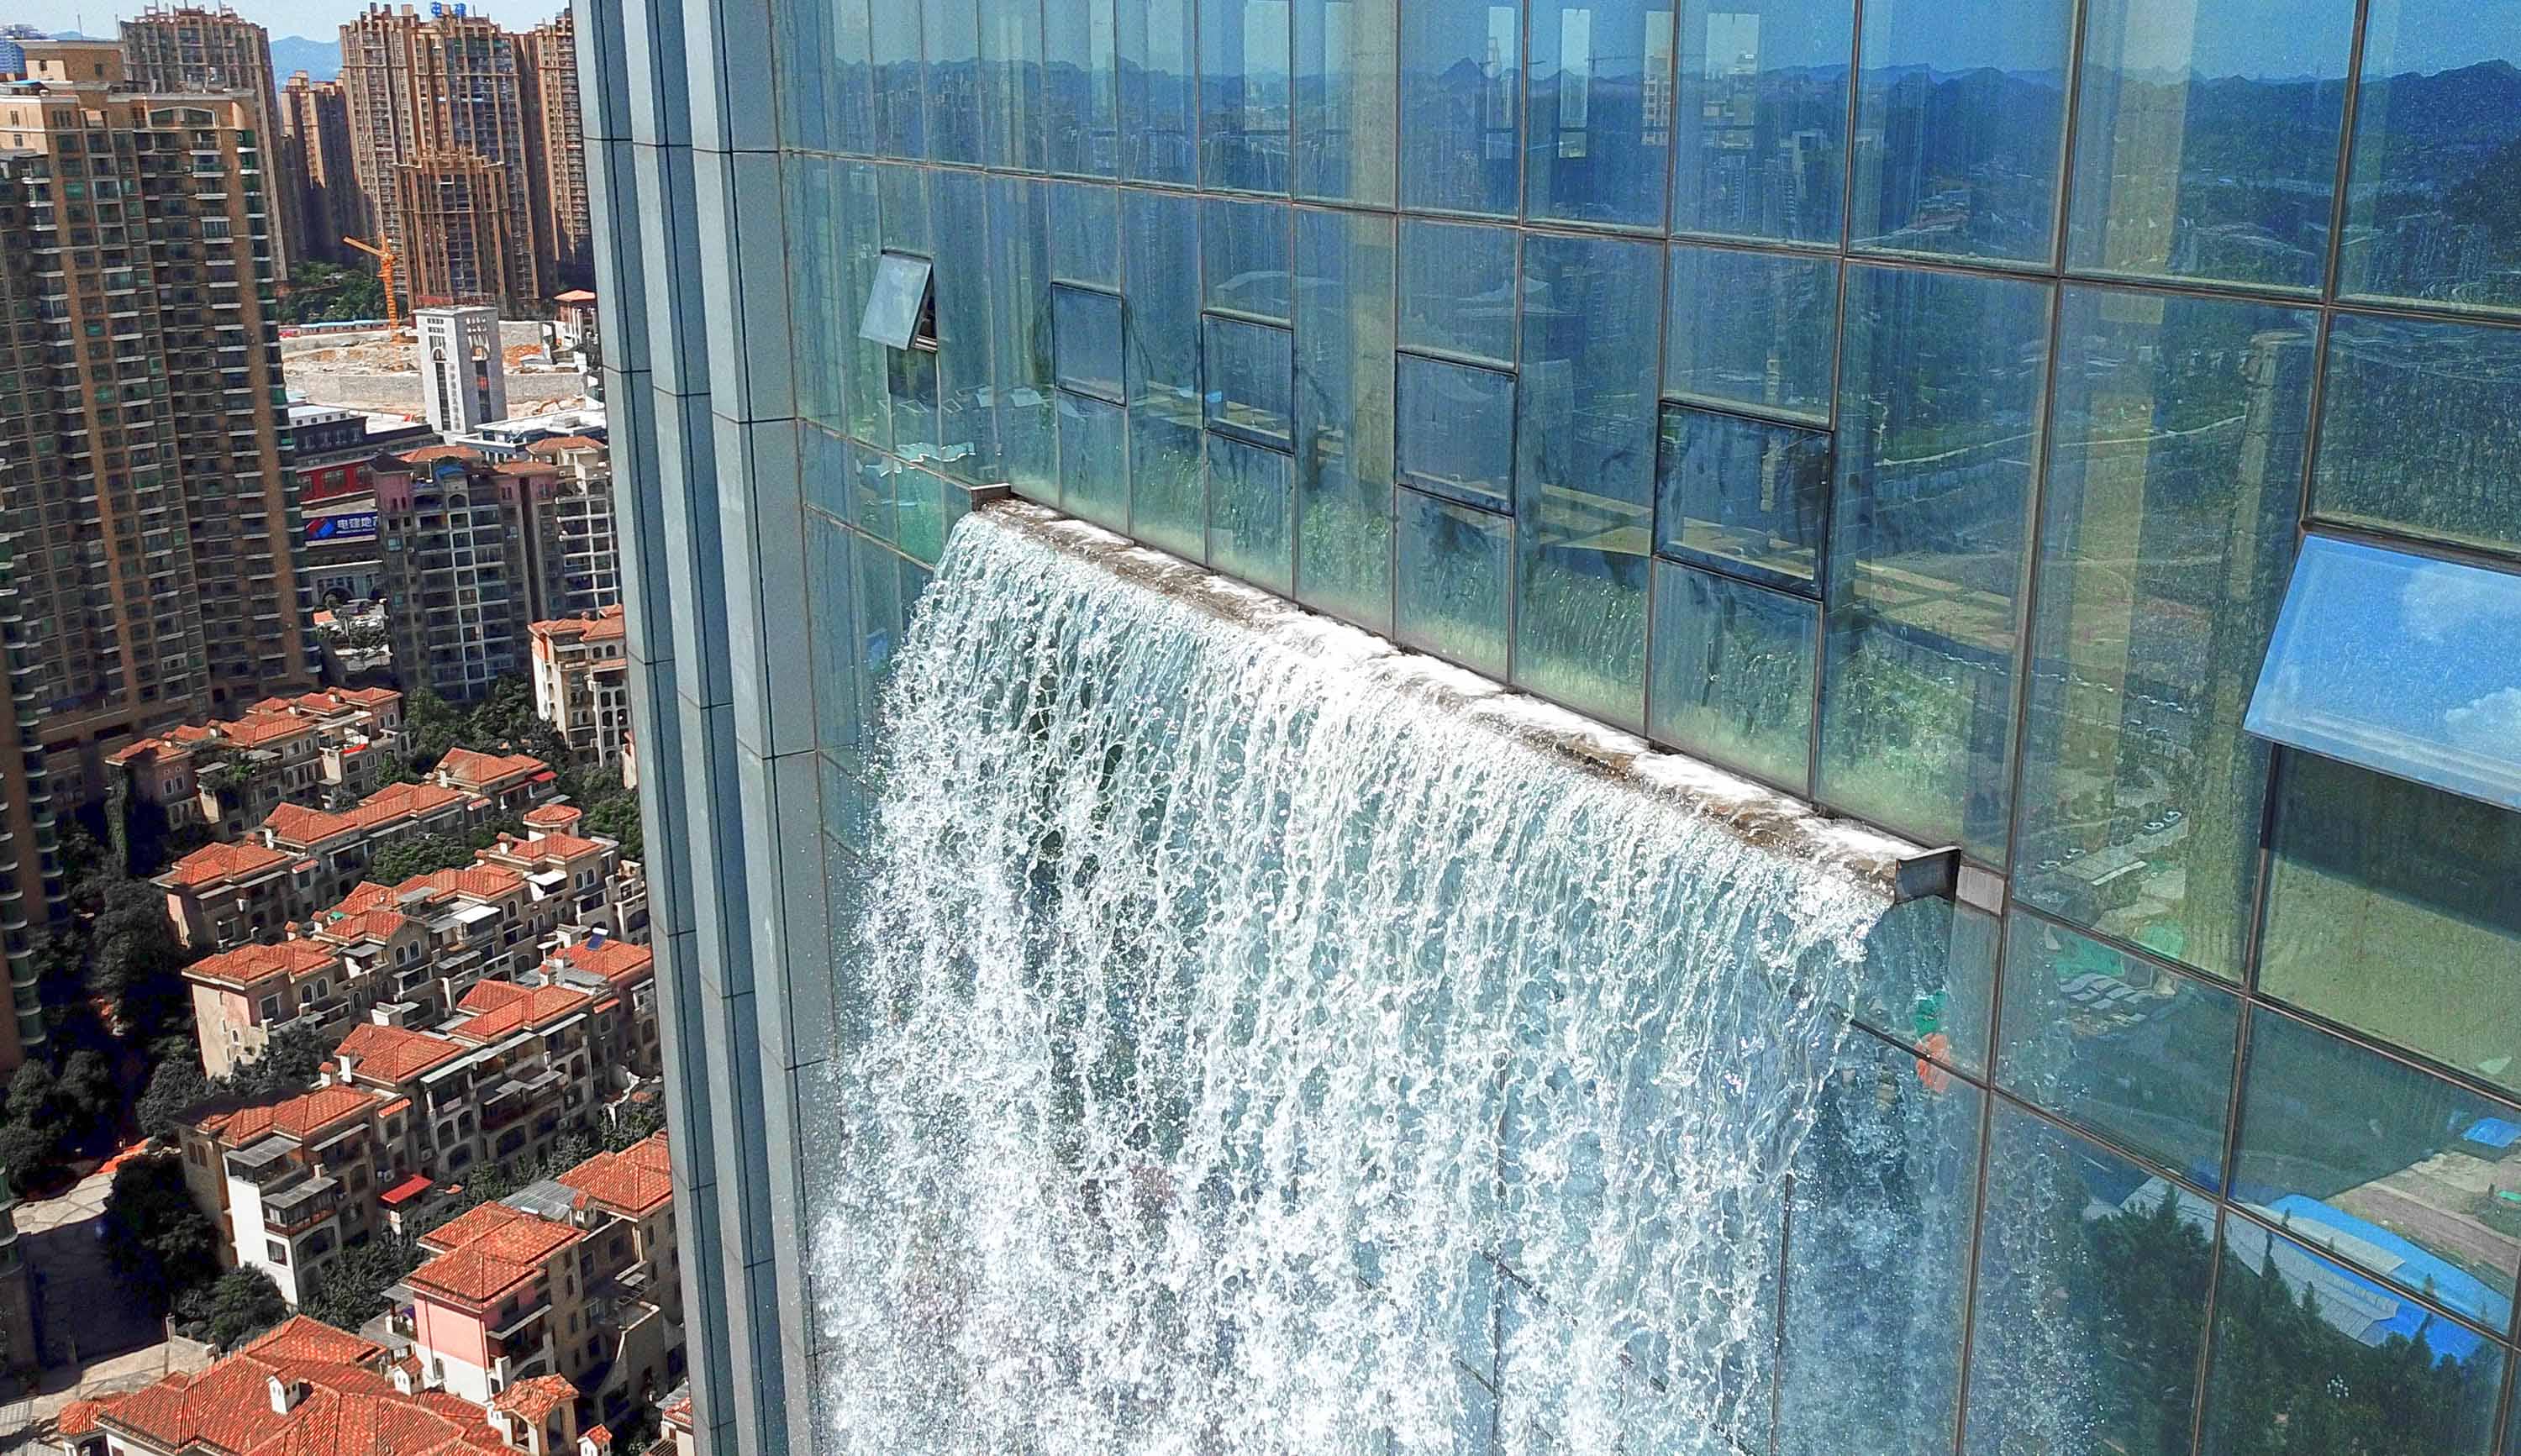 Artificial Waterfall Of A Building In China